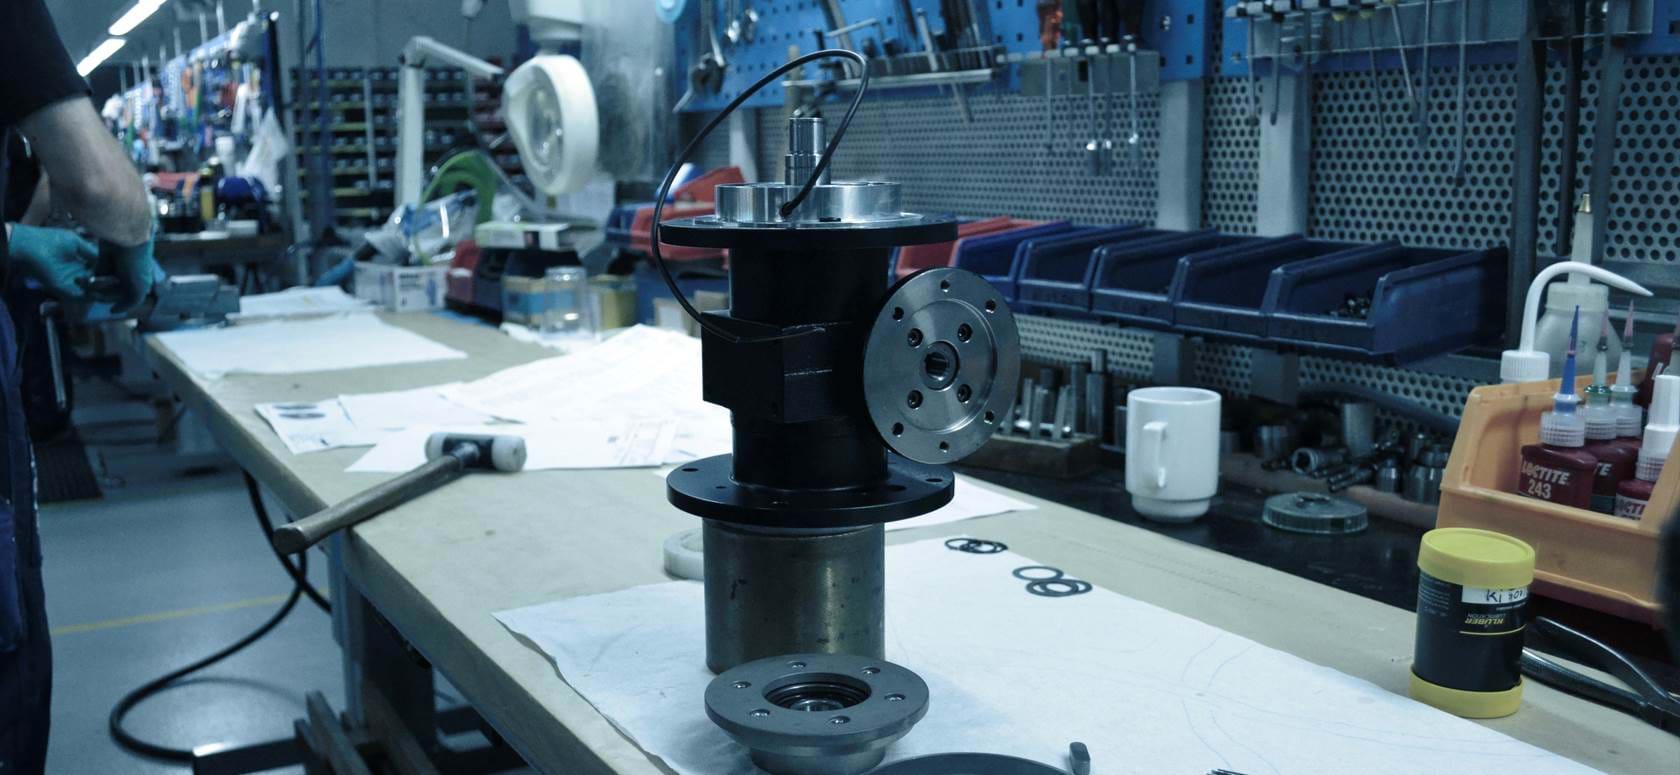 Gear coupling on a table in production